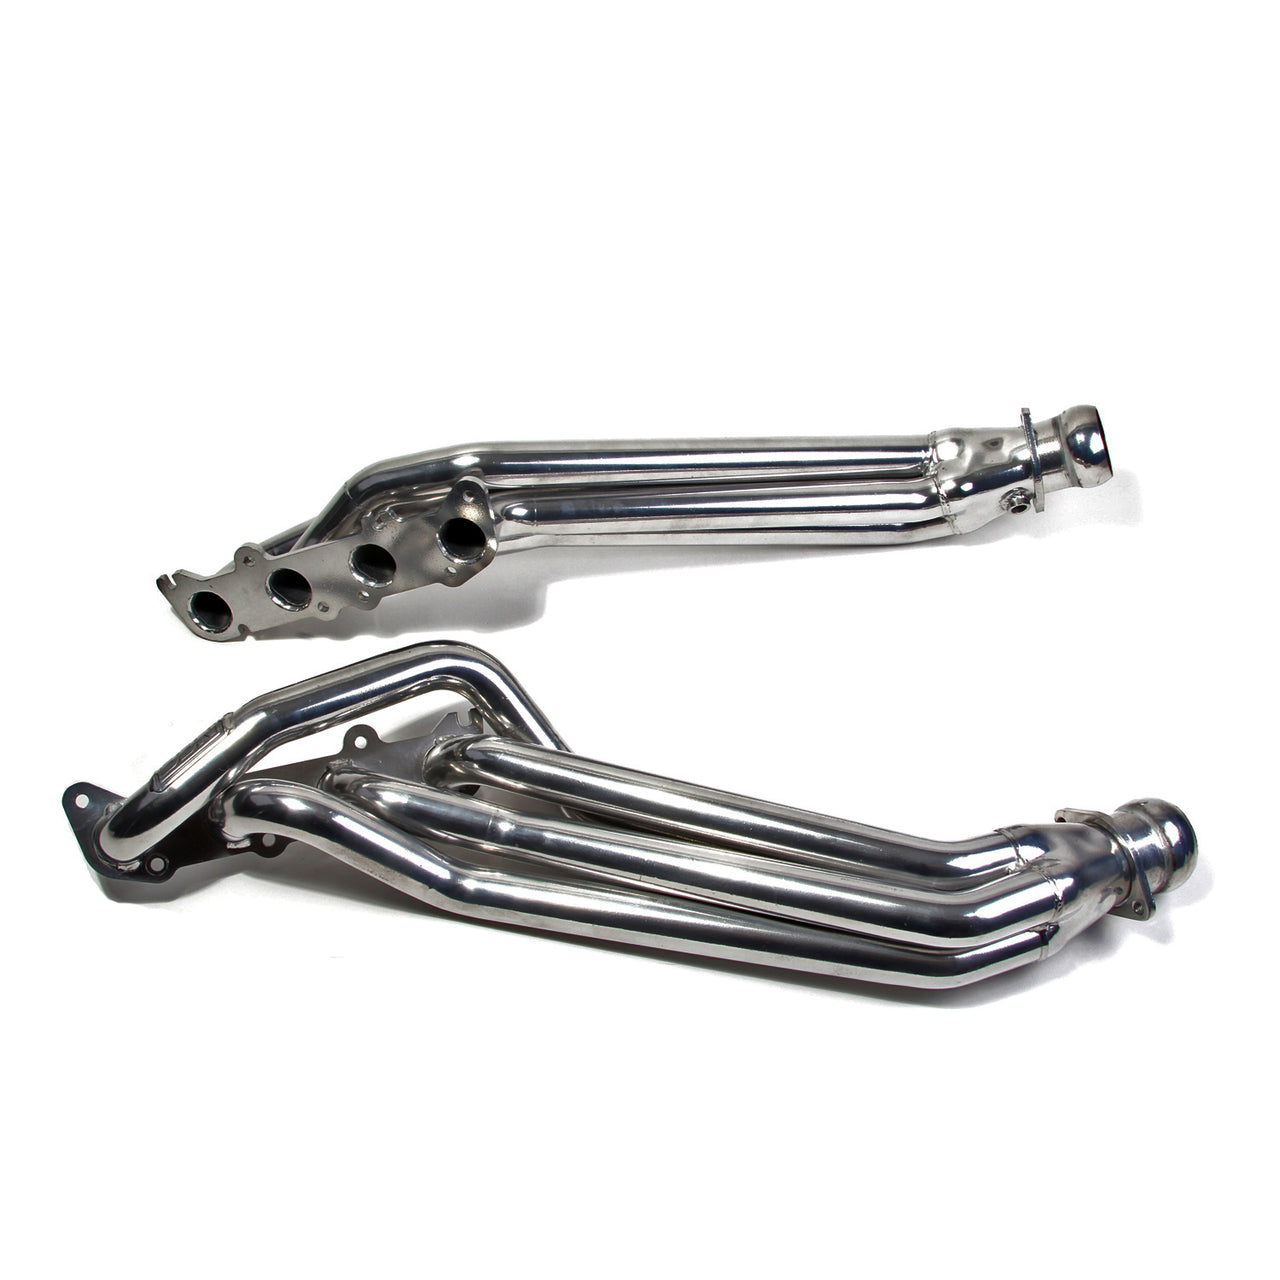 2011-2021 MUSTANG GT 5.0 1-7/8" LONG TUBE HEADERS (POLISHED SILVER CERAMIC)